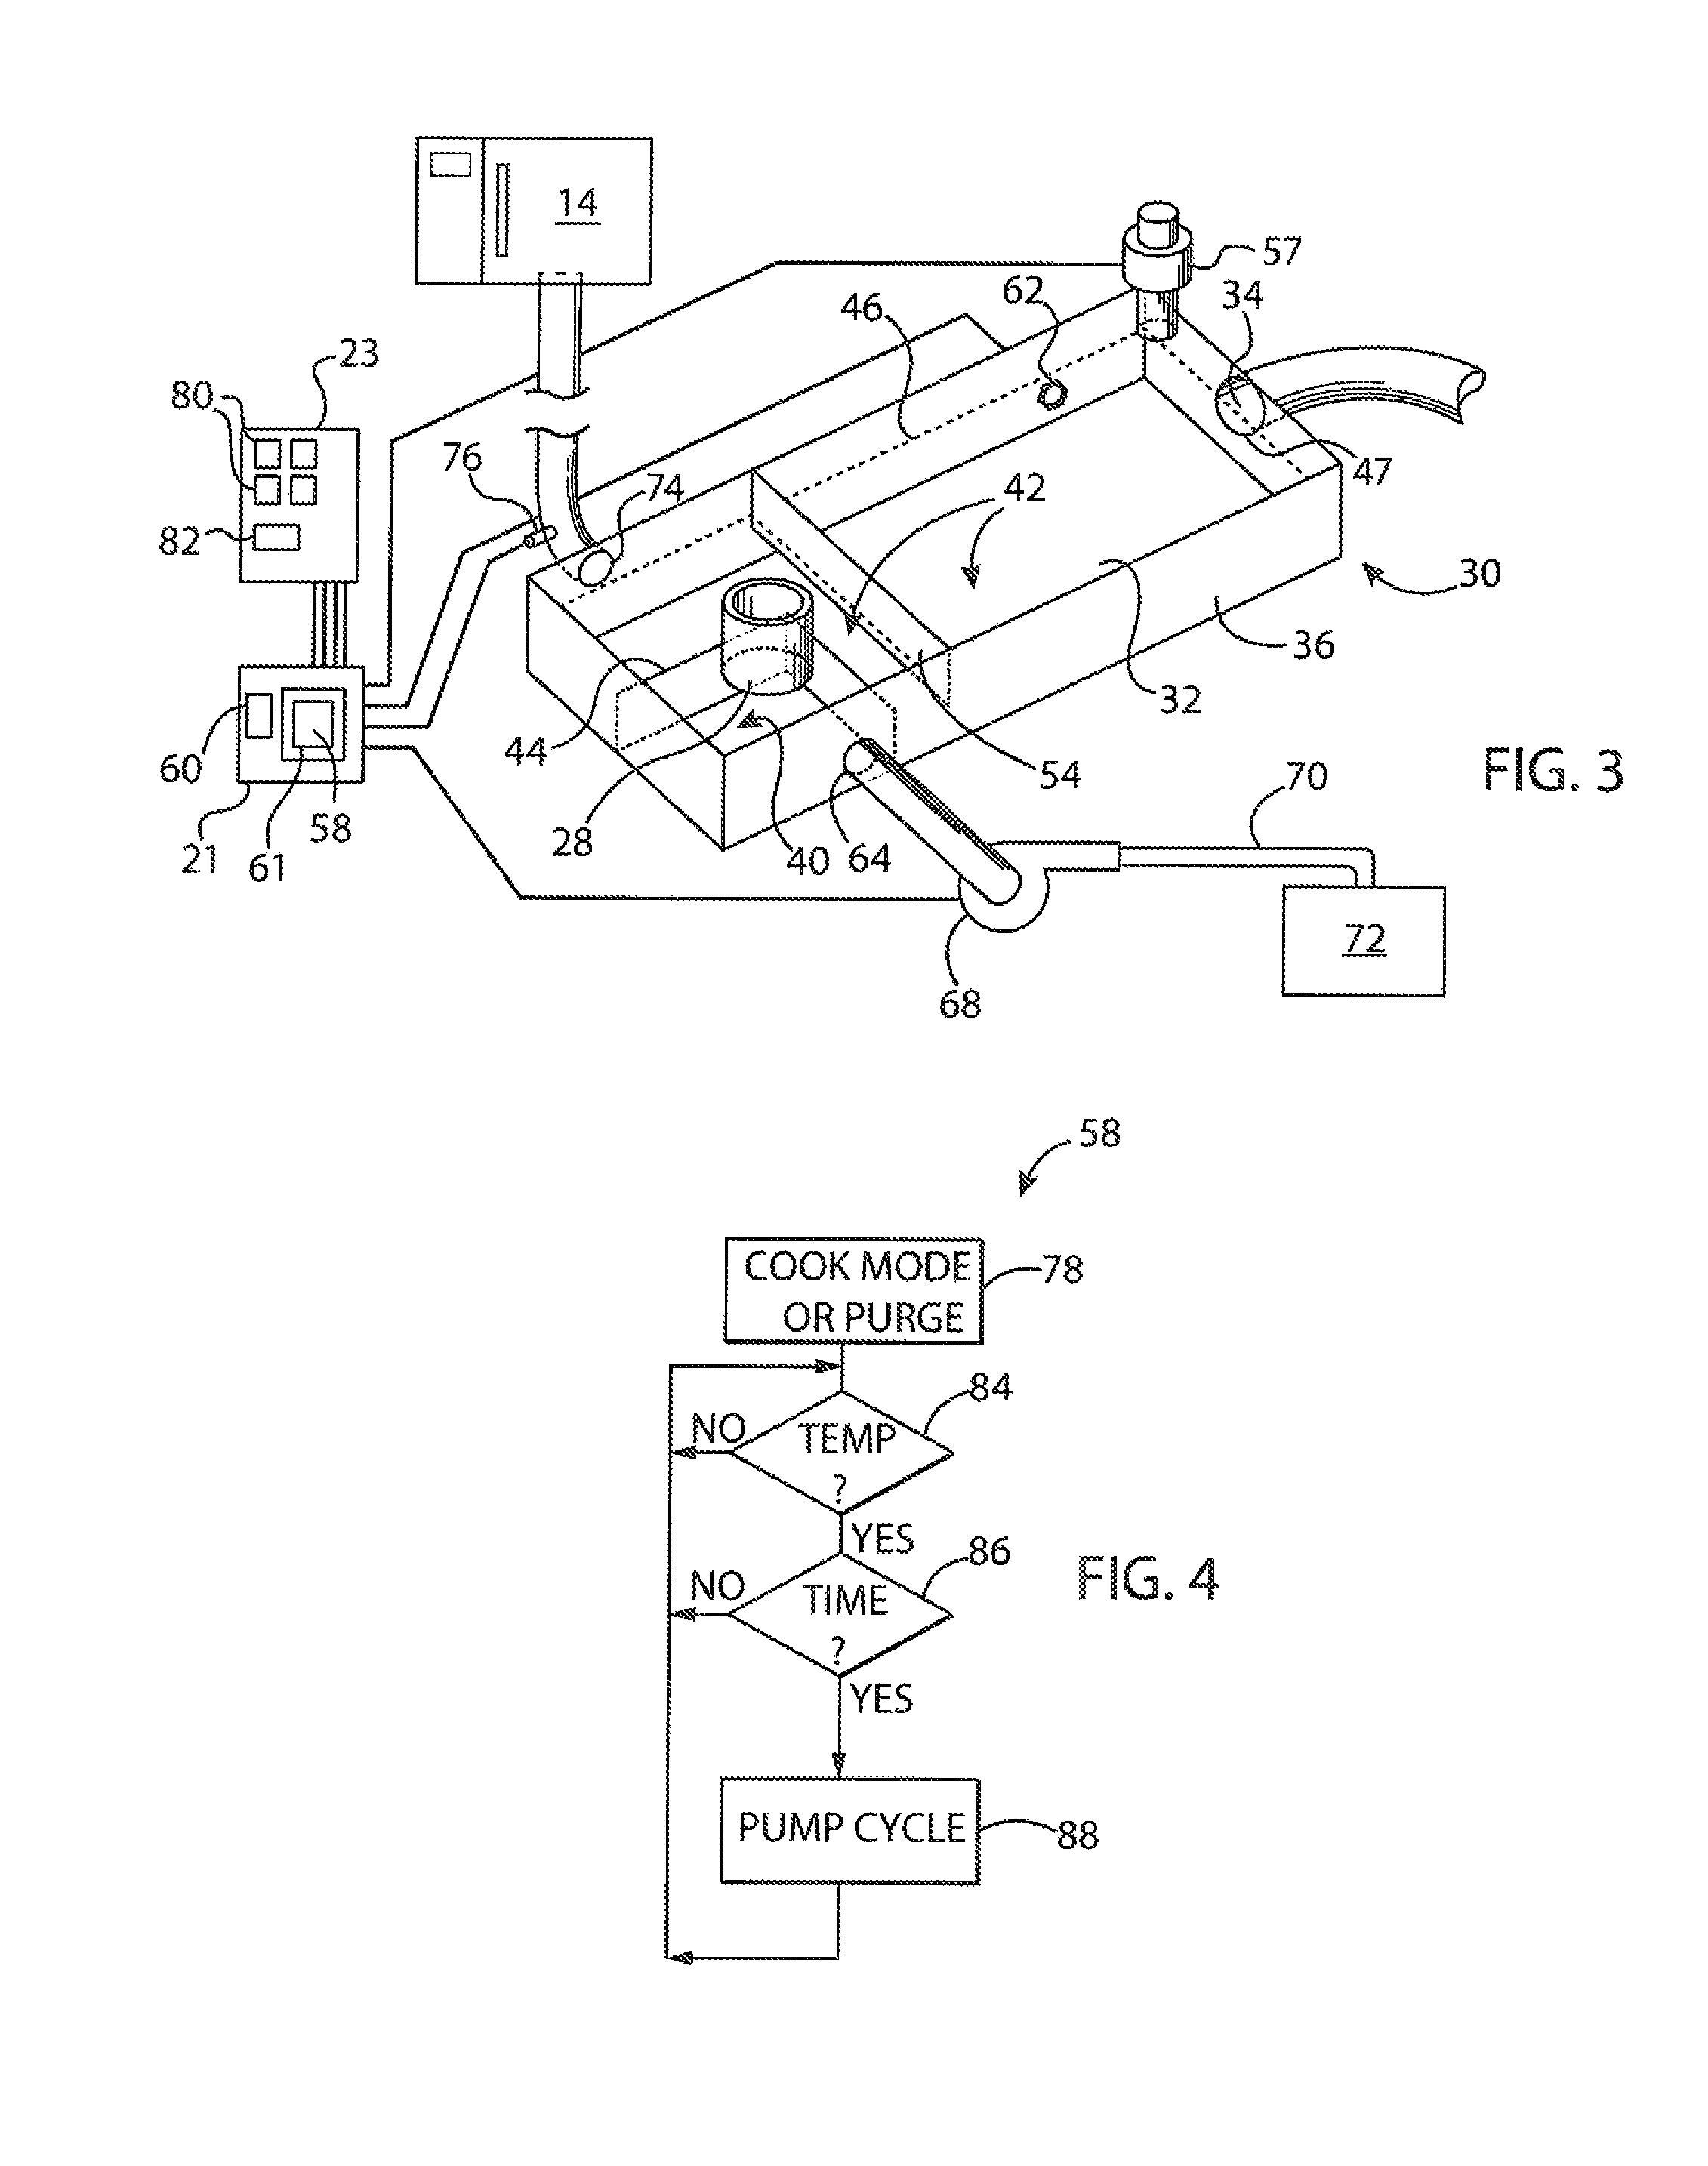 Grease handling apparatus for closed system oven